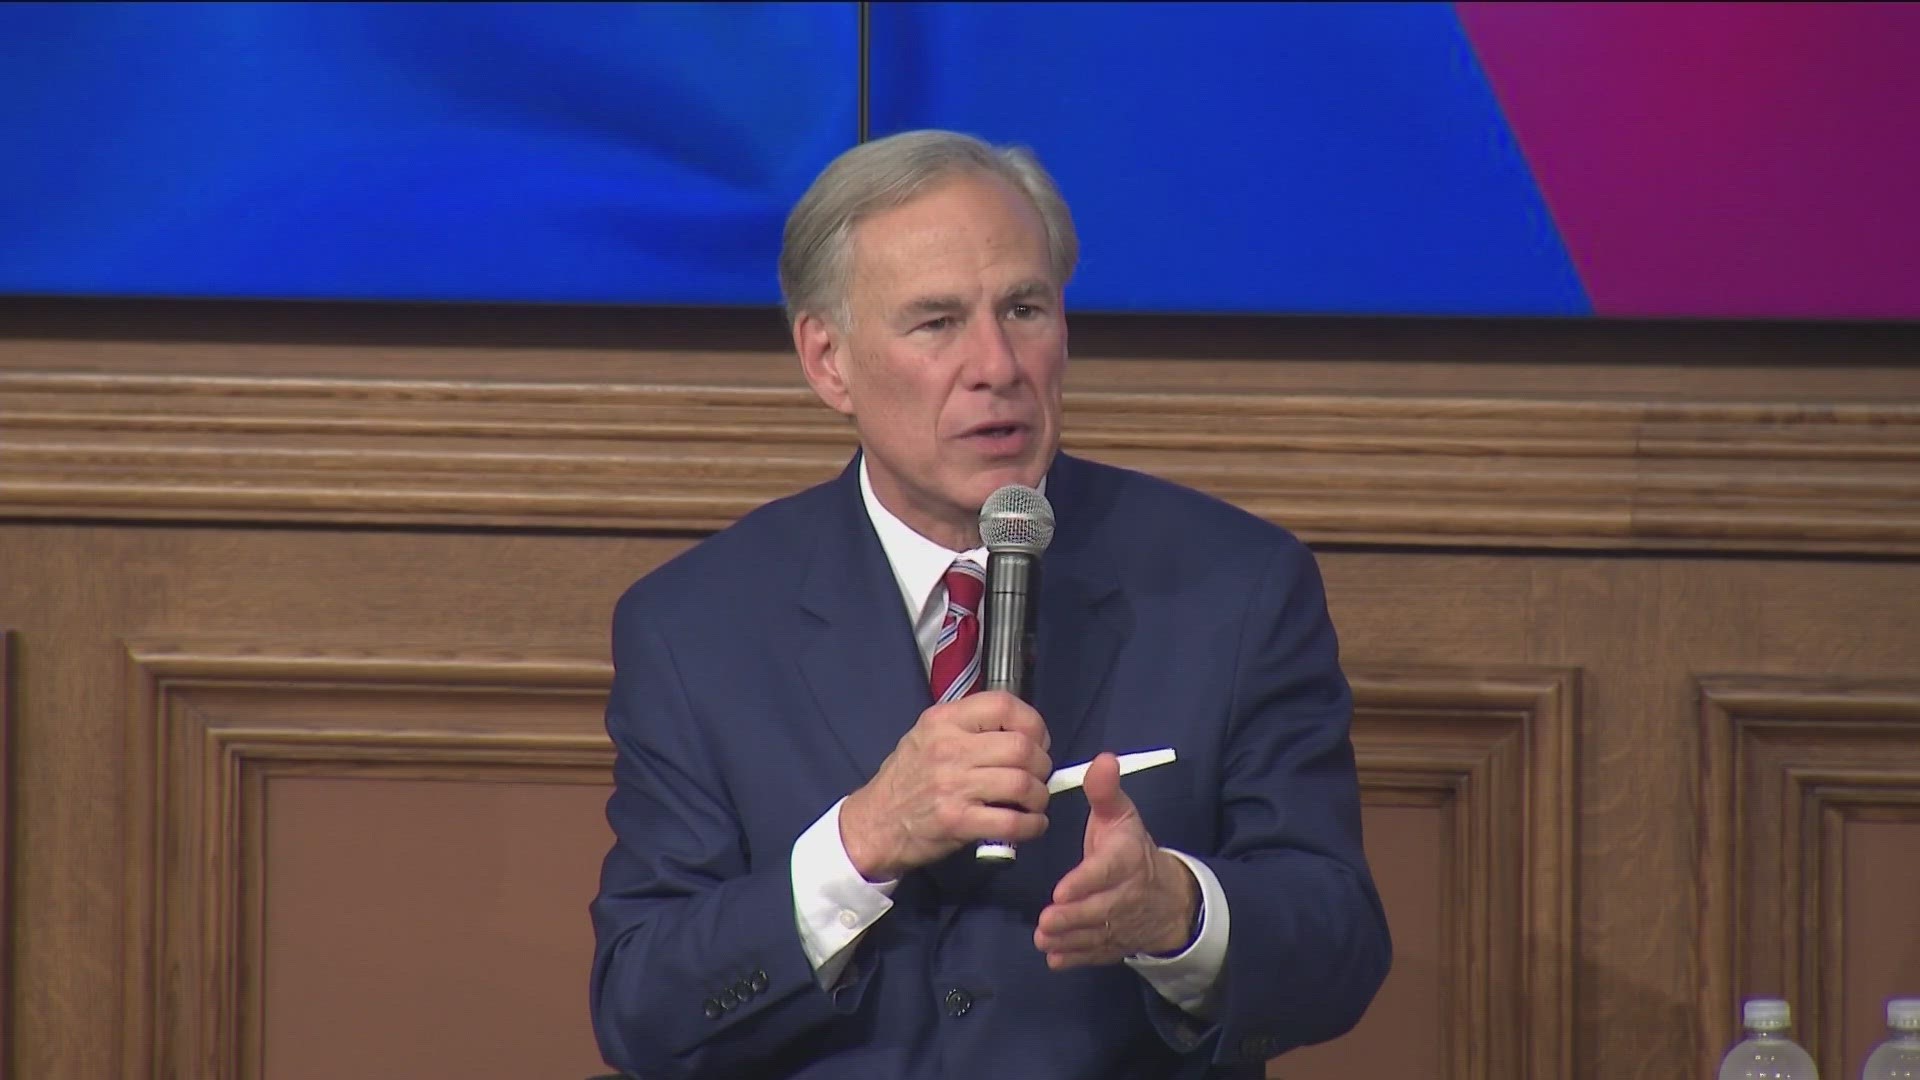 The governor discussed the session at the Texas Public Policy Foundation.